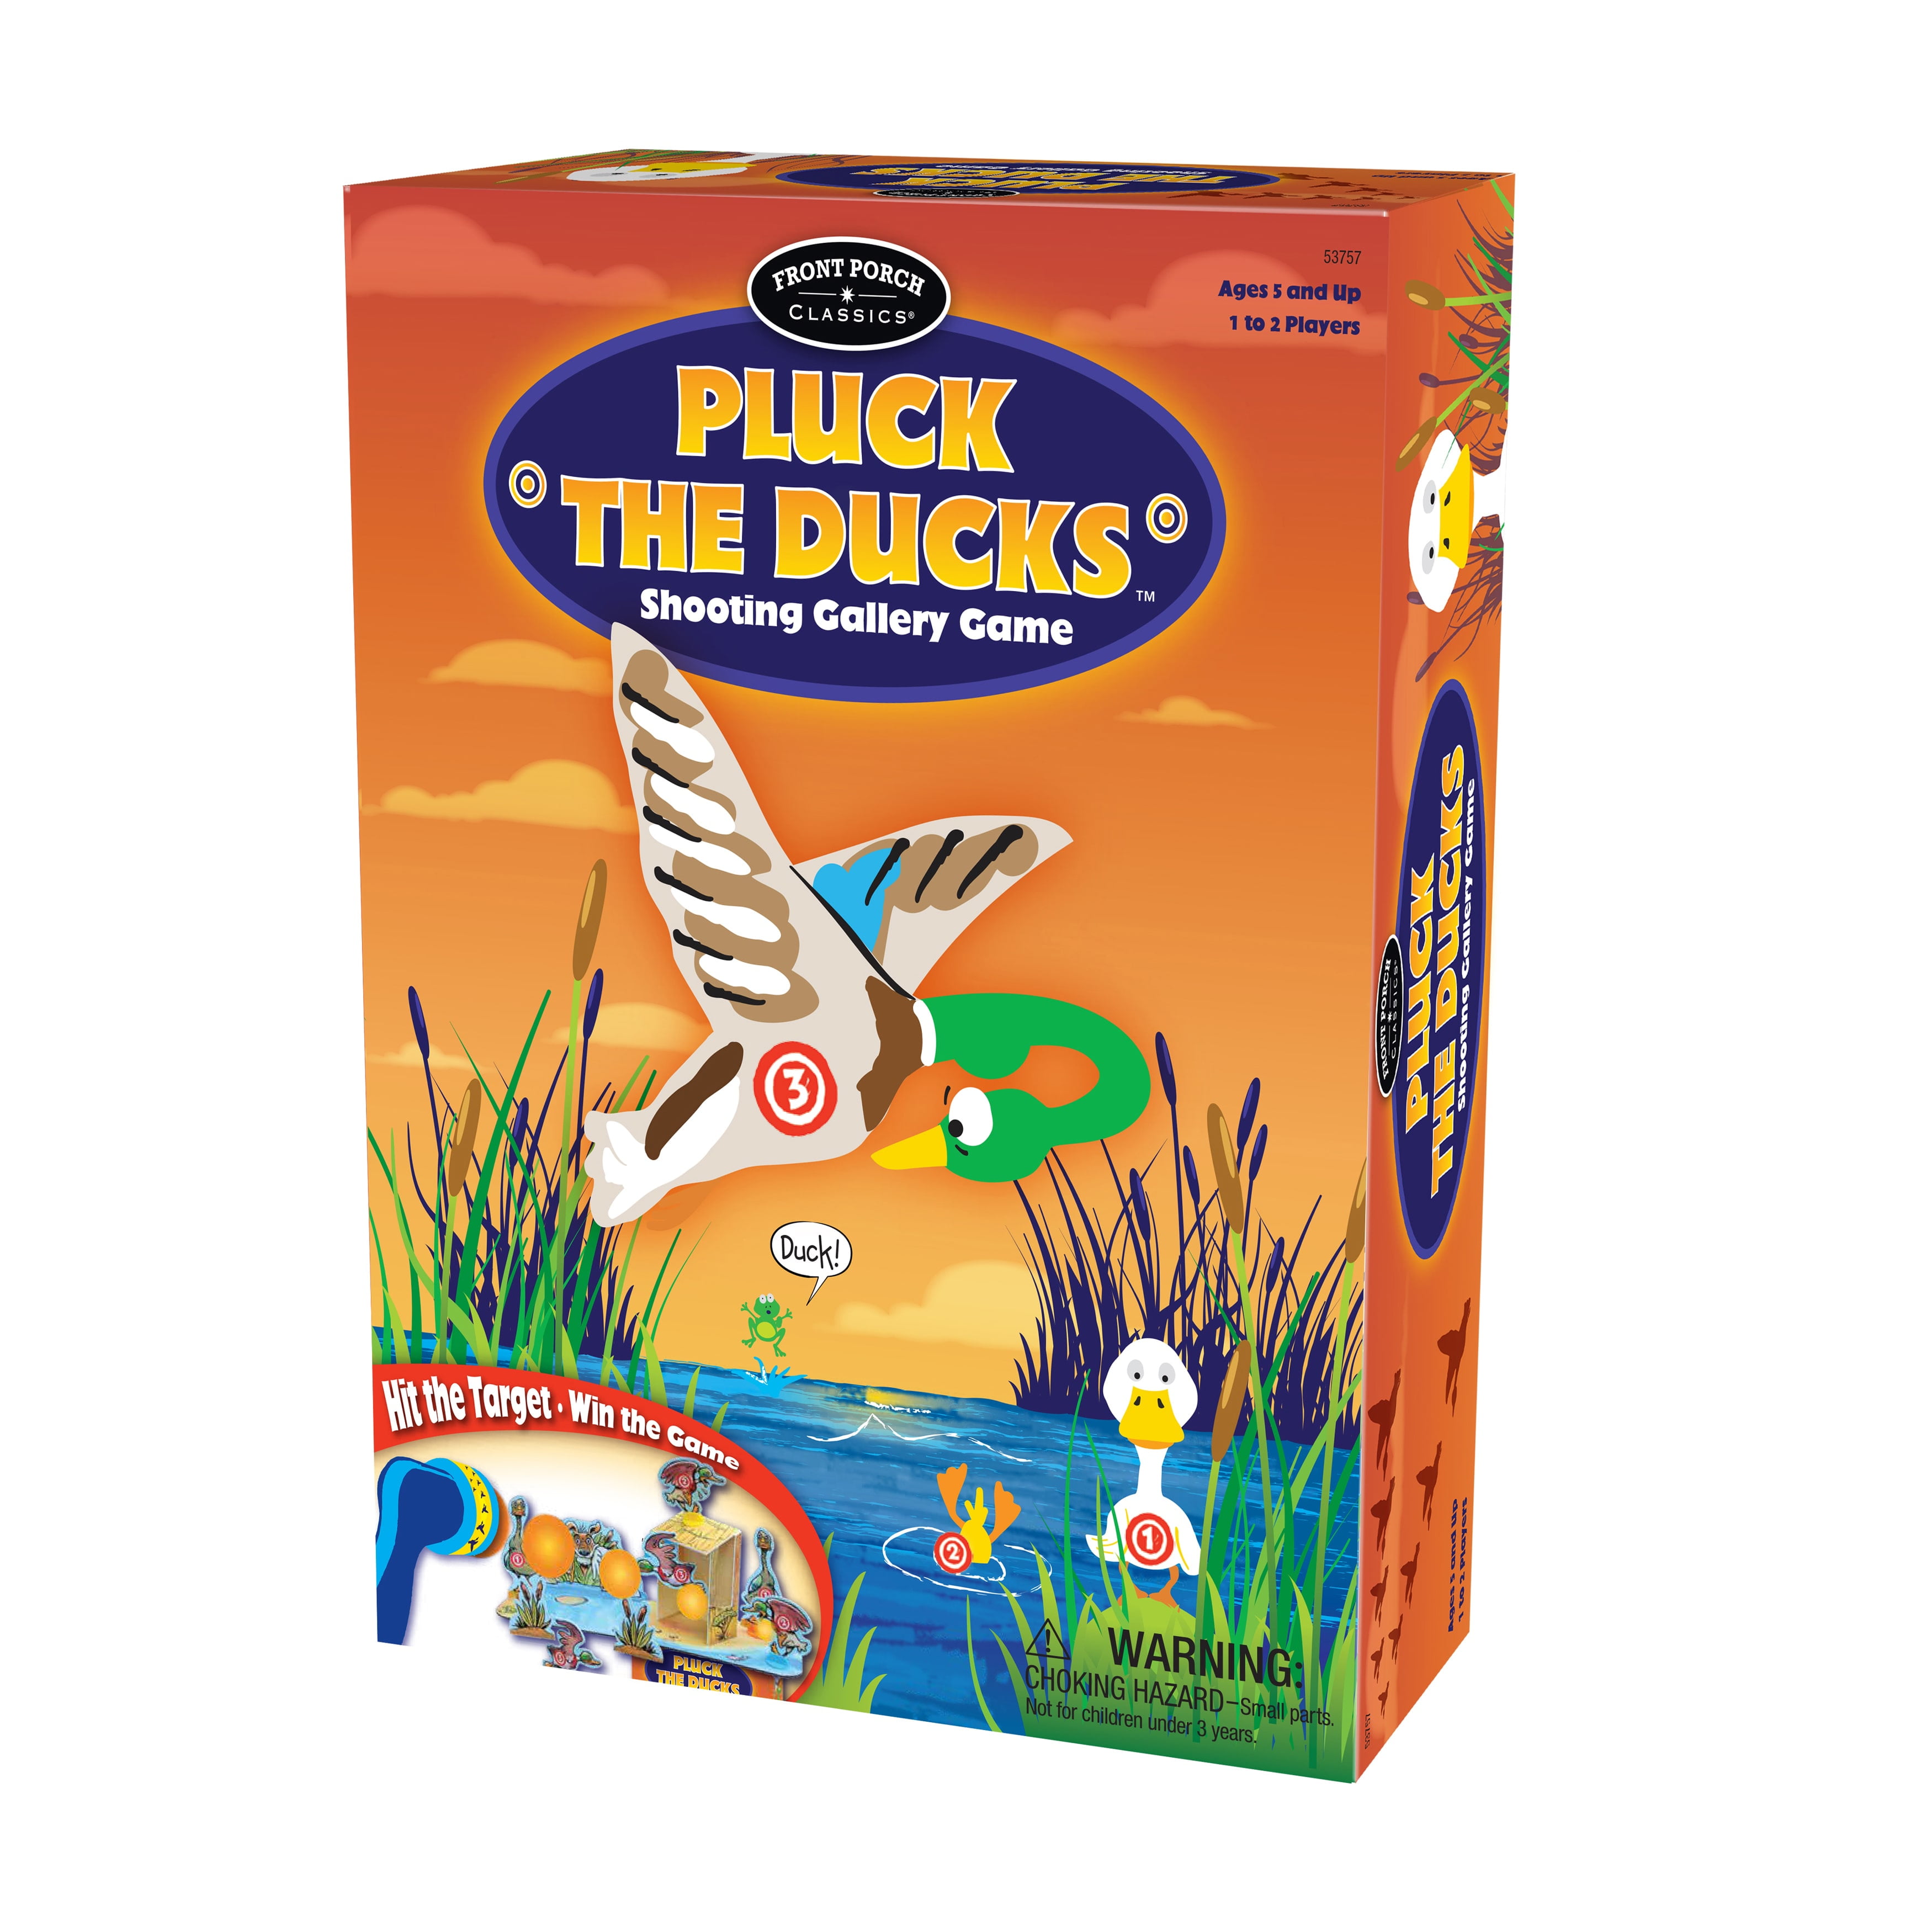 Pluck the Ducks Shooting Gallery Game